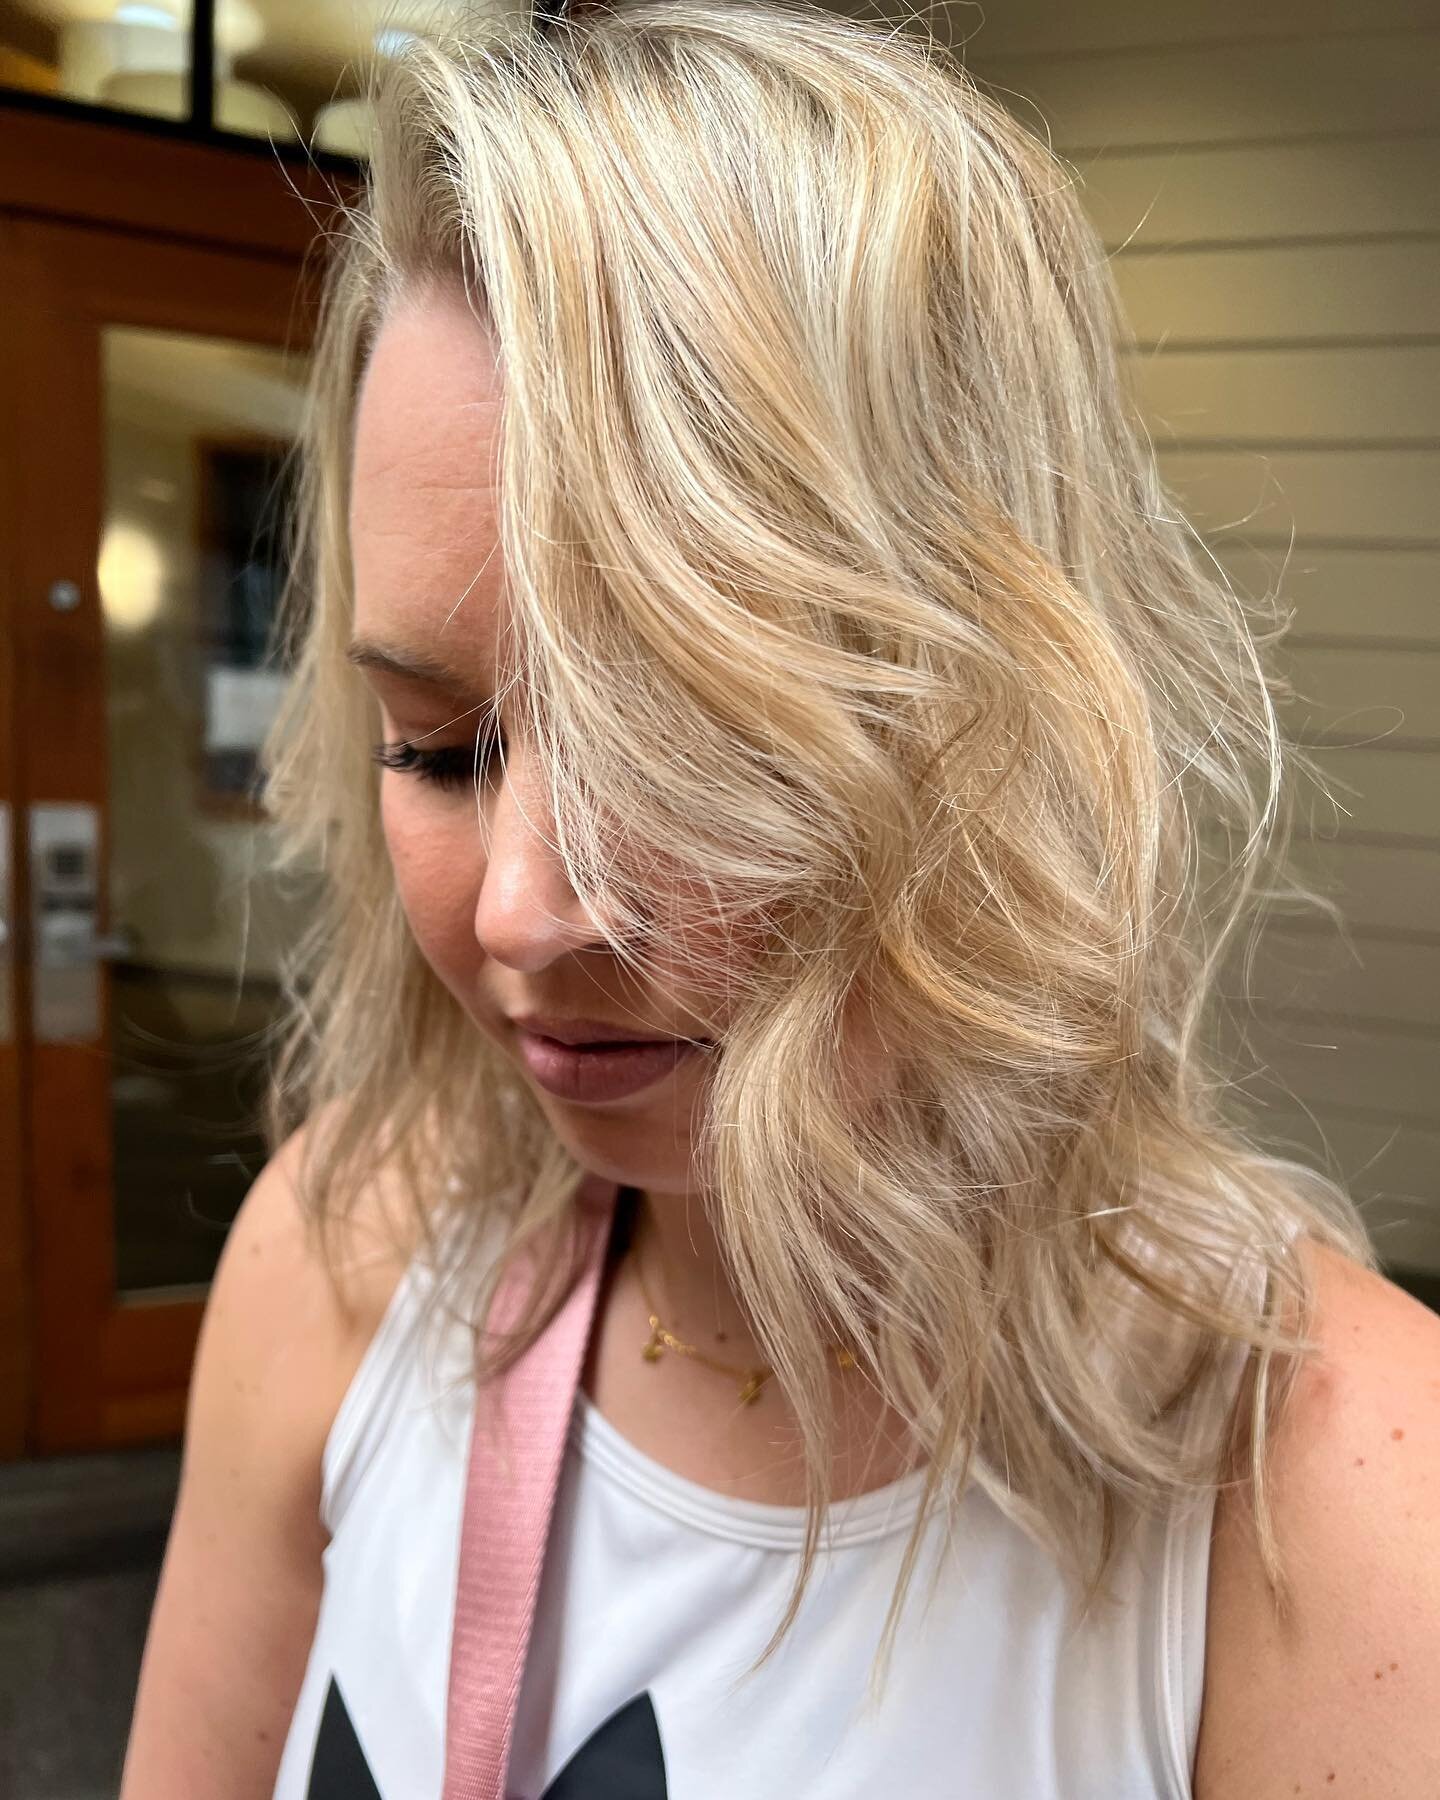 Blonde perfection for the one and only @onceuponafitnessco @champagneandsparkle_  Swipe for before!